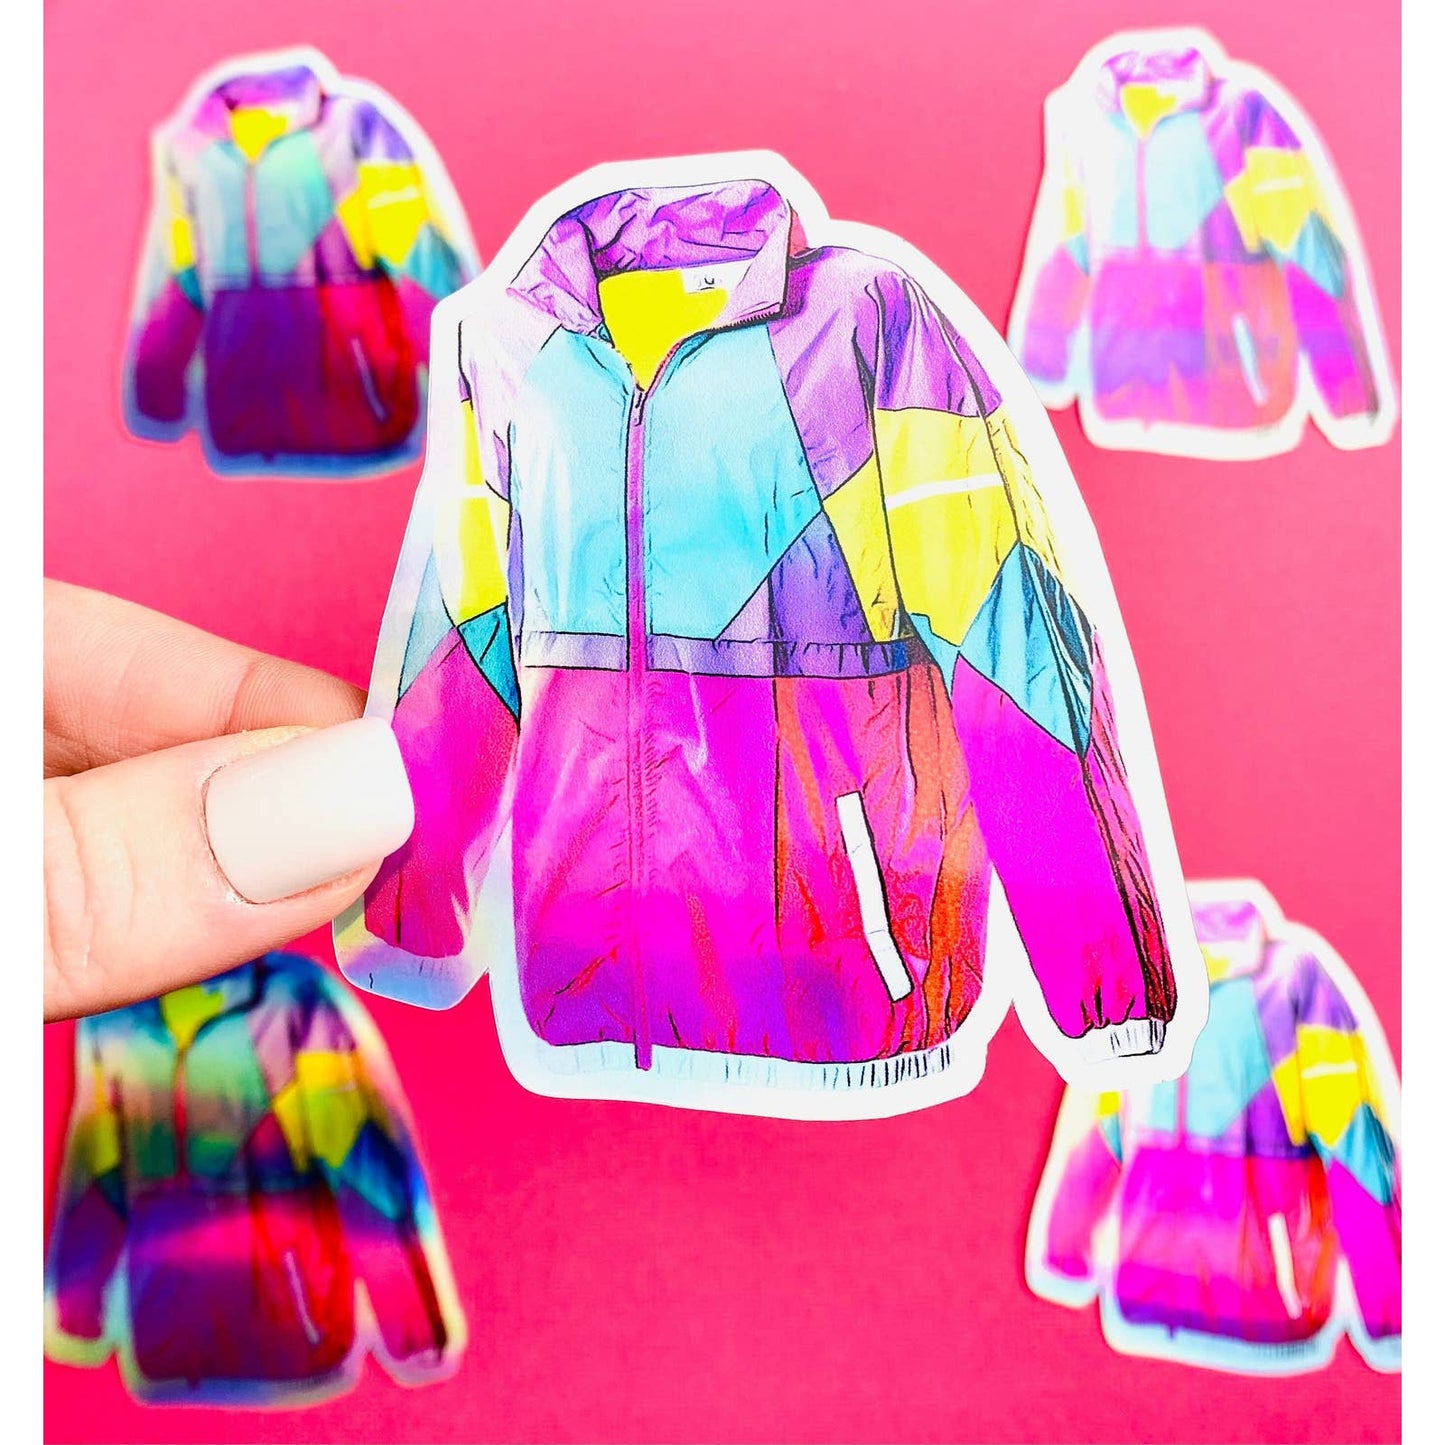 90s Windbreaker Holographic Sticker 1990 Fashion Sticker for Nineties Stickers, 90s Stickers 90s Aesthetic 90s Jacket - 90s Party Favor